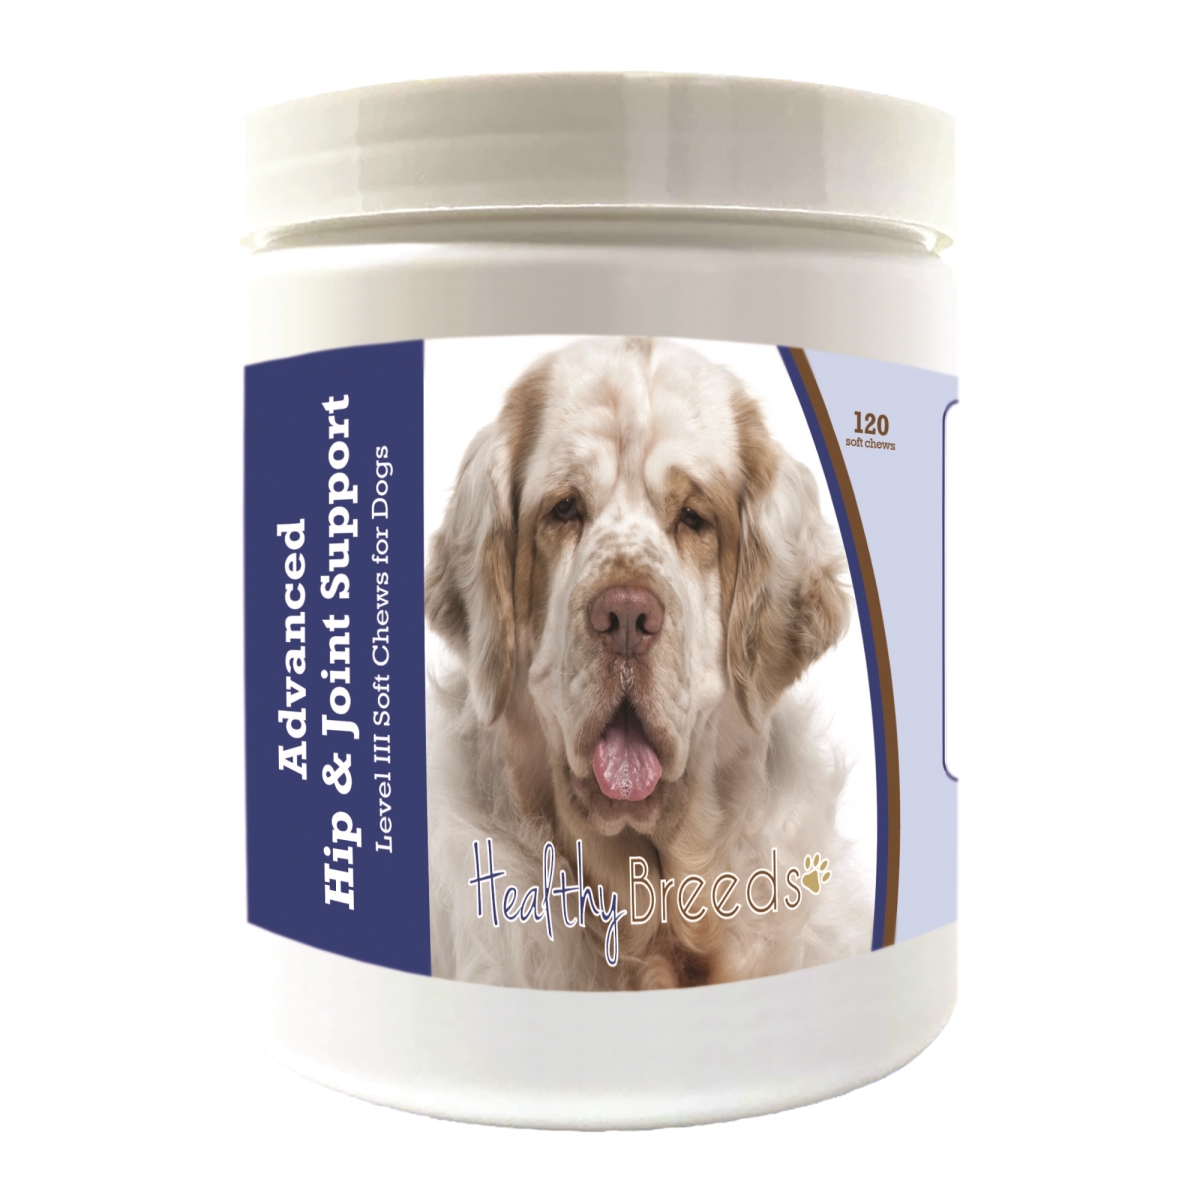 Picture of Healthy Breeds 192959897975 Clumber Spaniel Advanced Hip & Joint Support Level III Soft Chews for Dogs